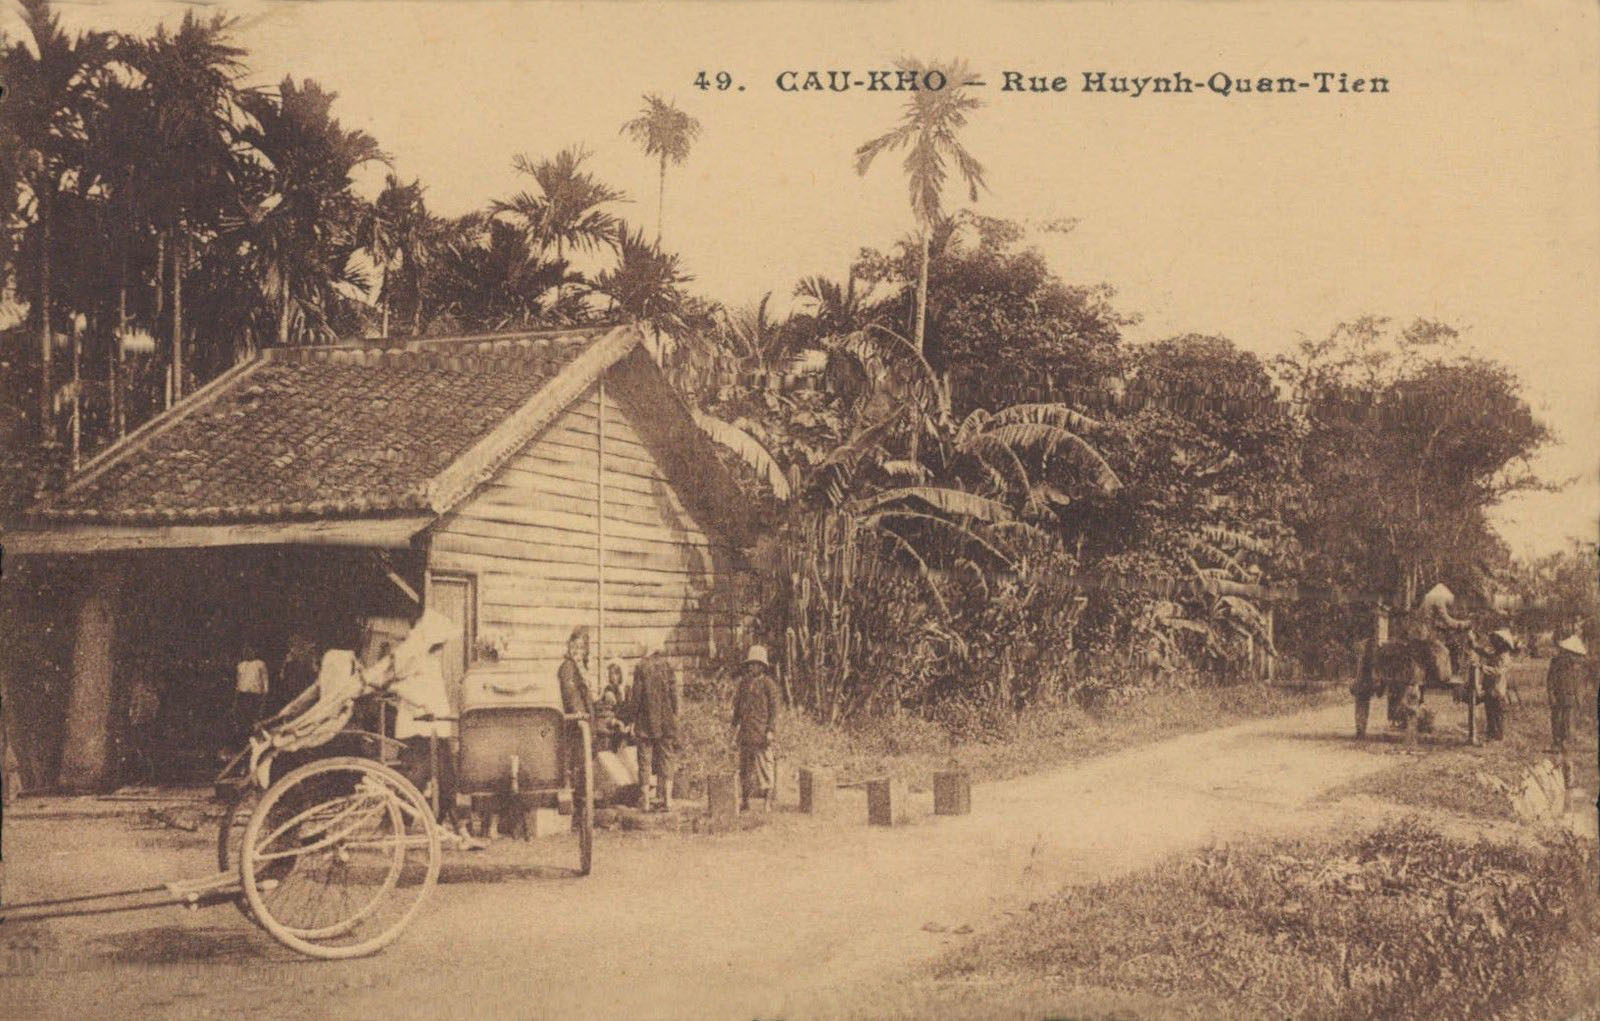 a sepia - toned pograph of an amish house with people riding on bicycles